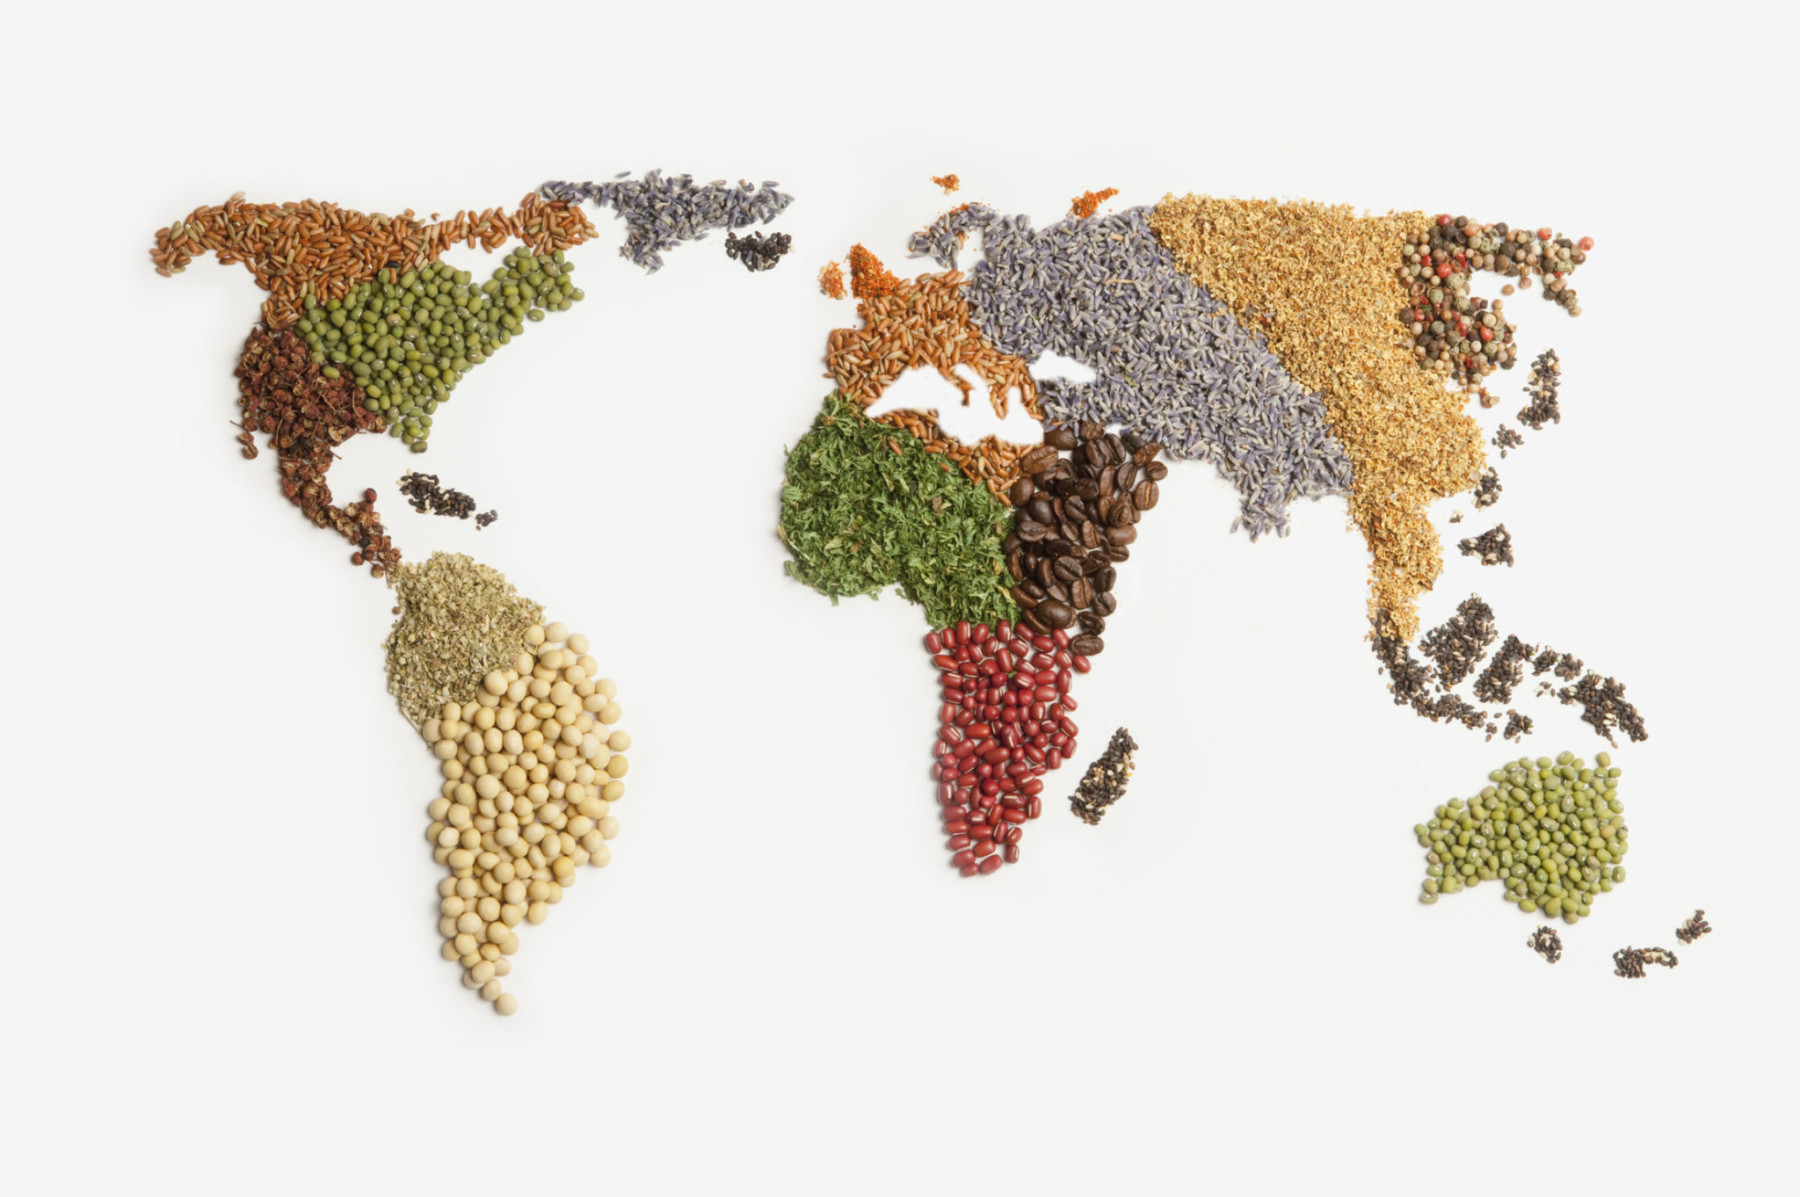 Map of world made of various seeds